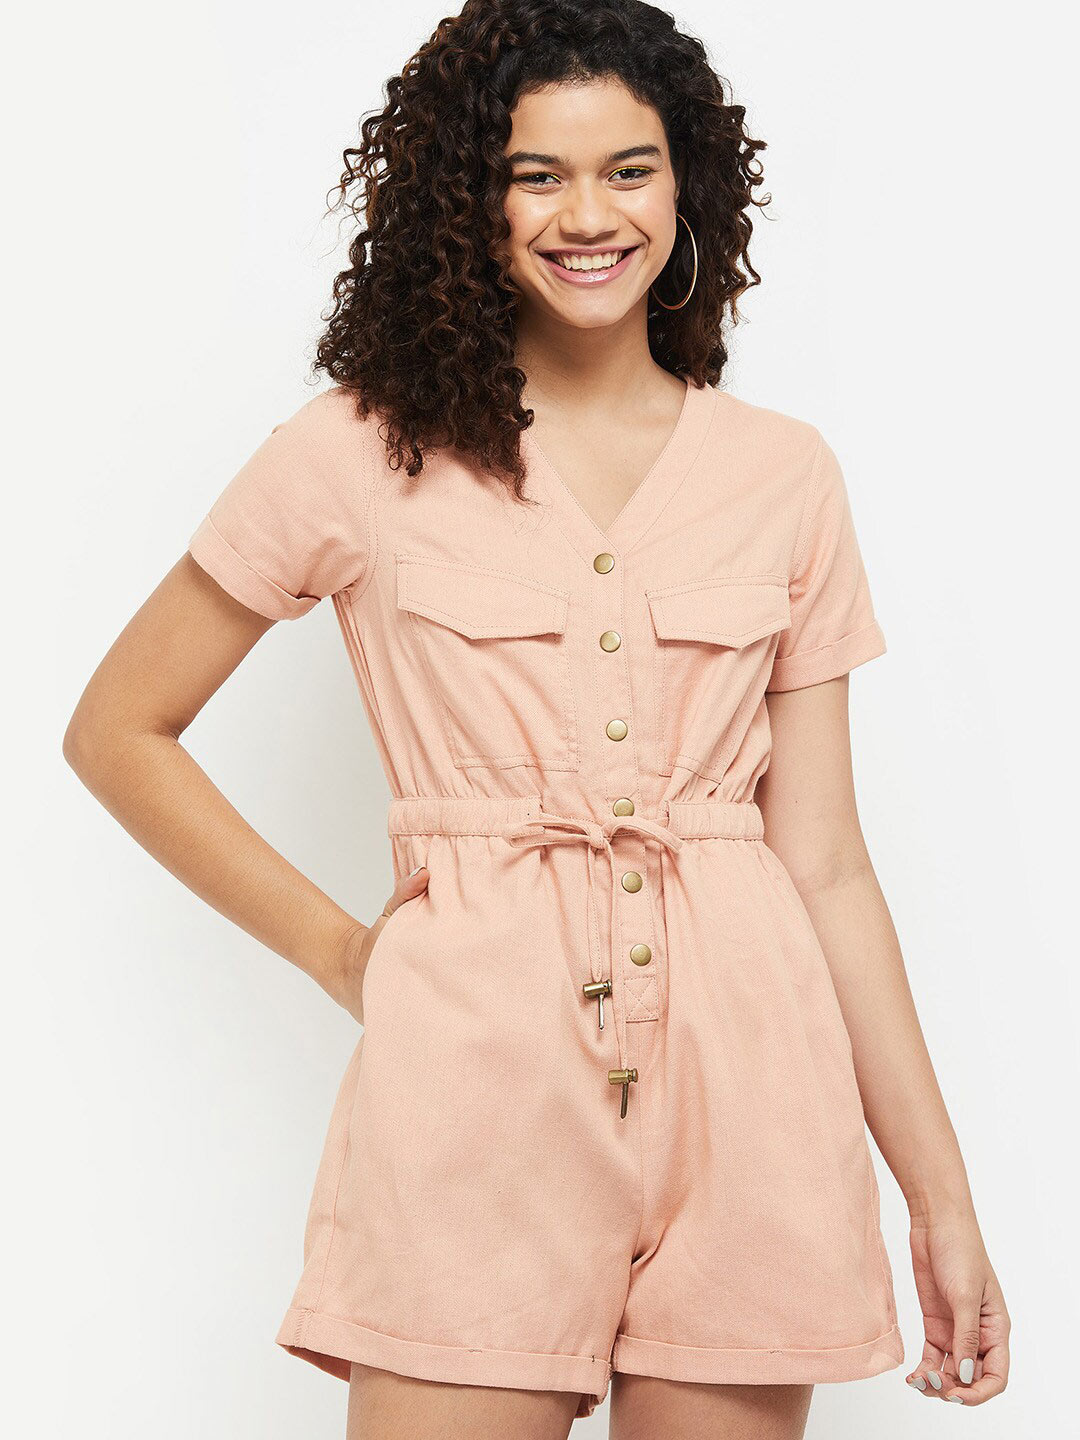 max Women Peach-Coloured Waist Tie-Up Playsuit Price in India